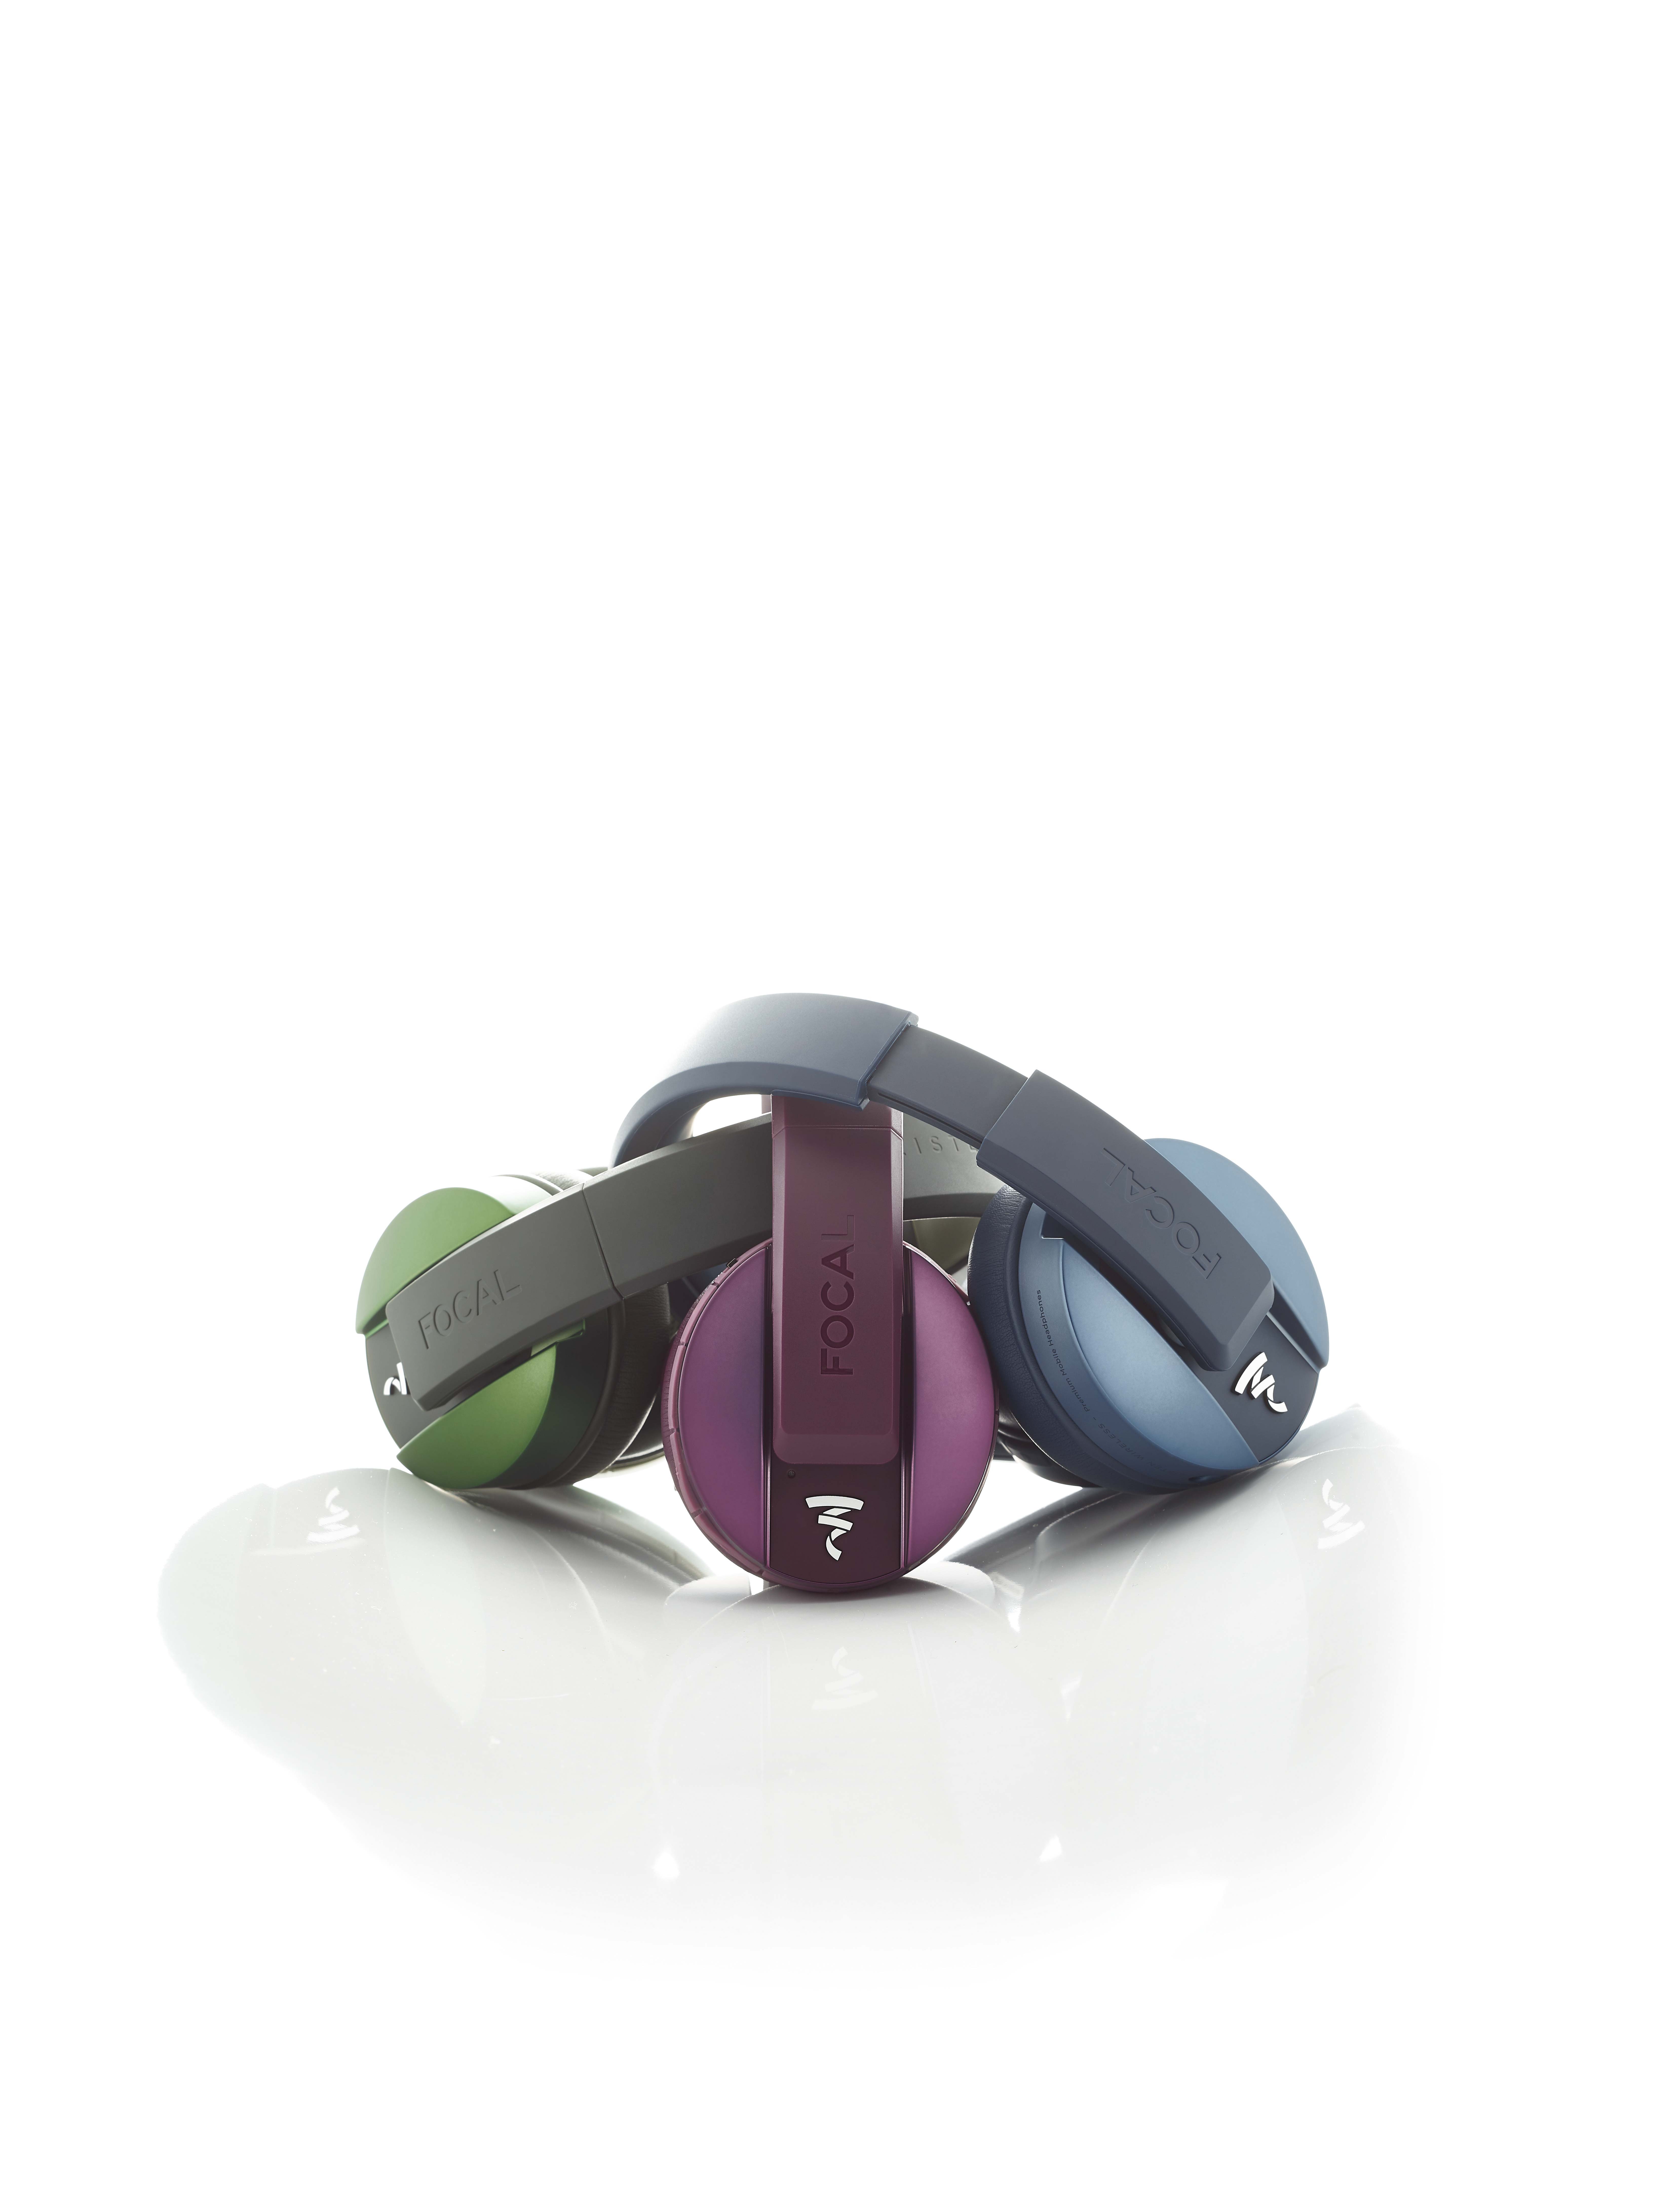 The Focal Listen Wireless Chic headphones in a neat pile together.